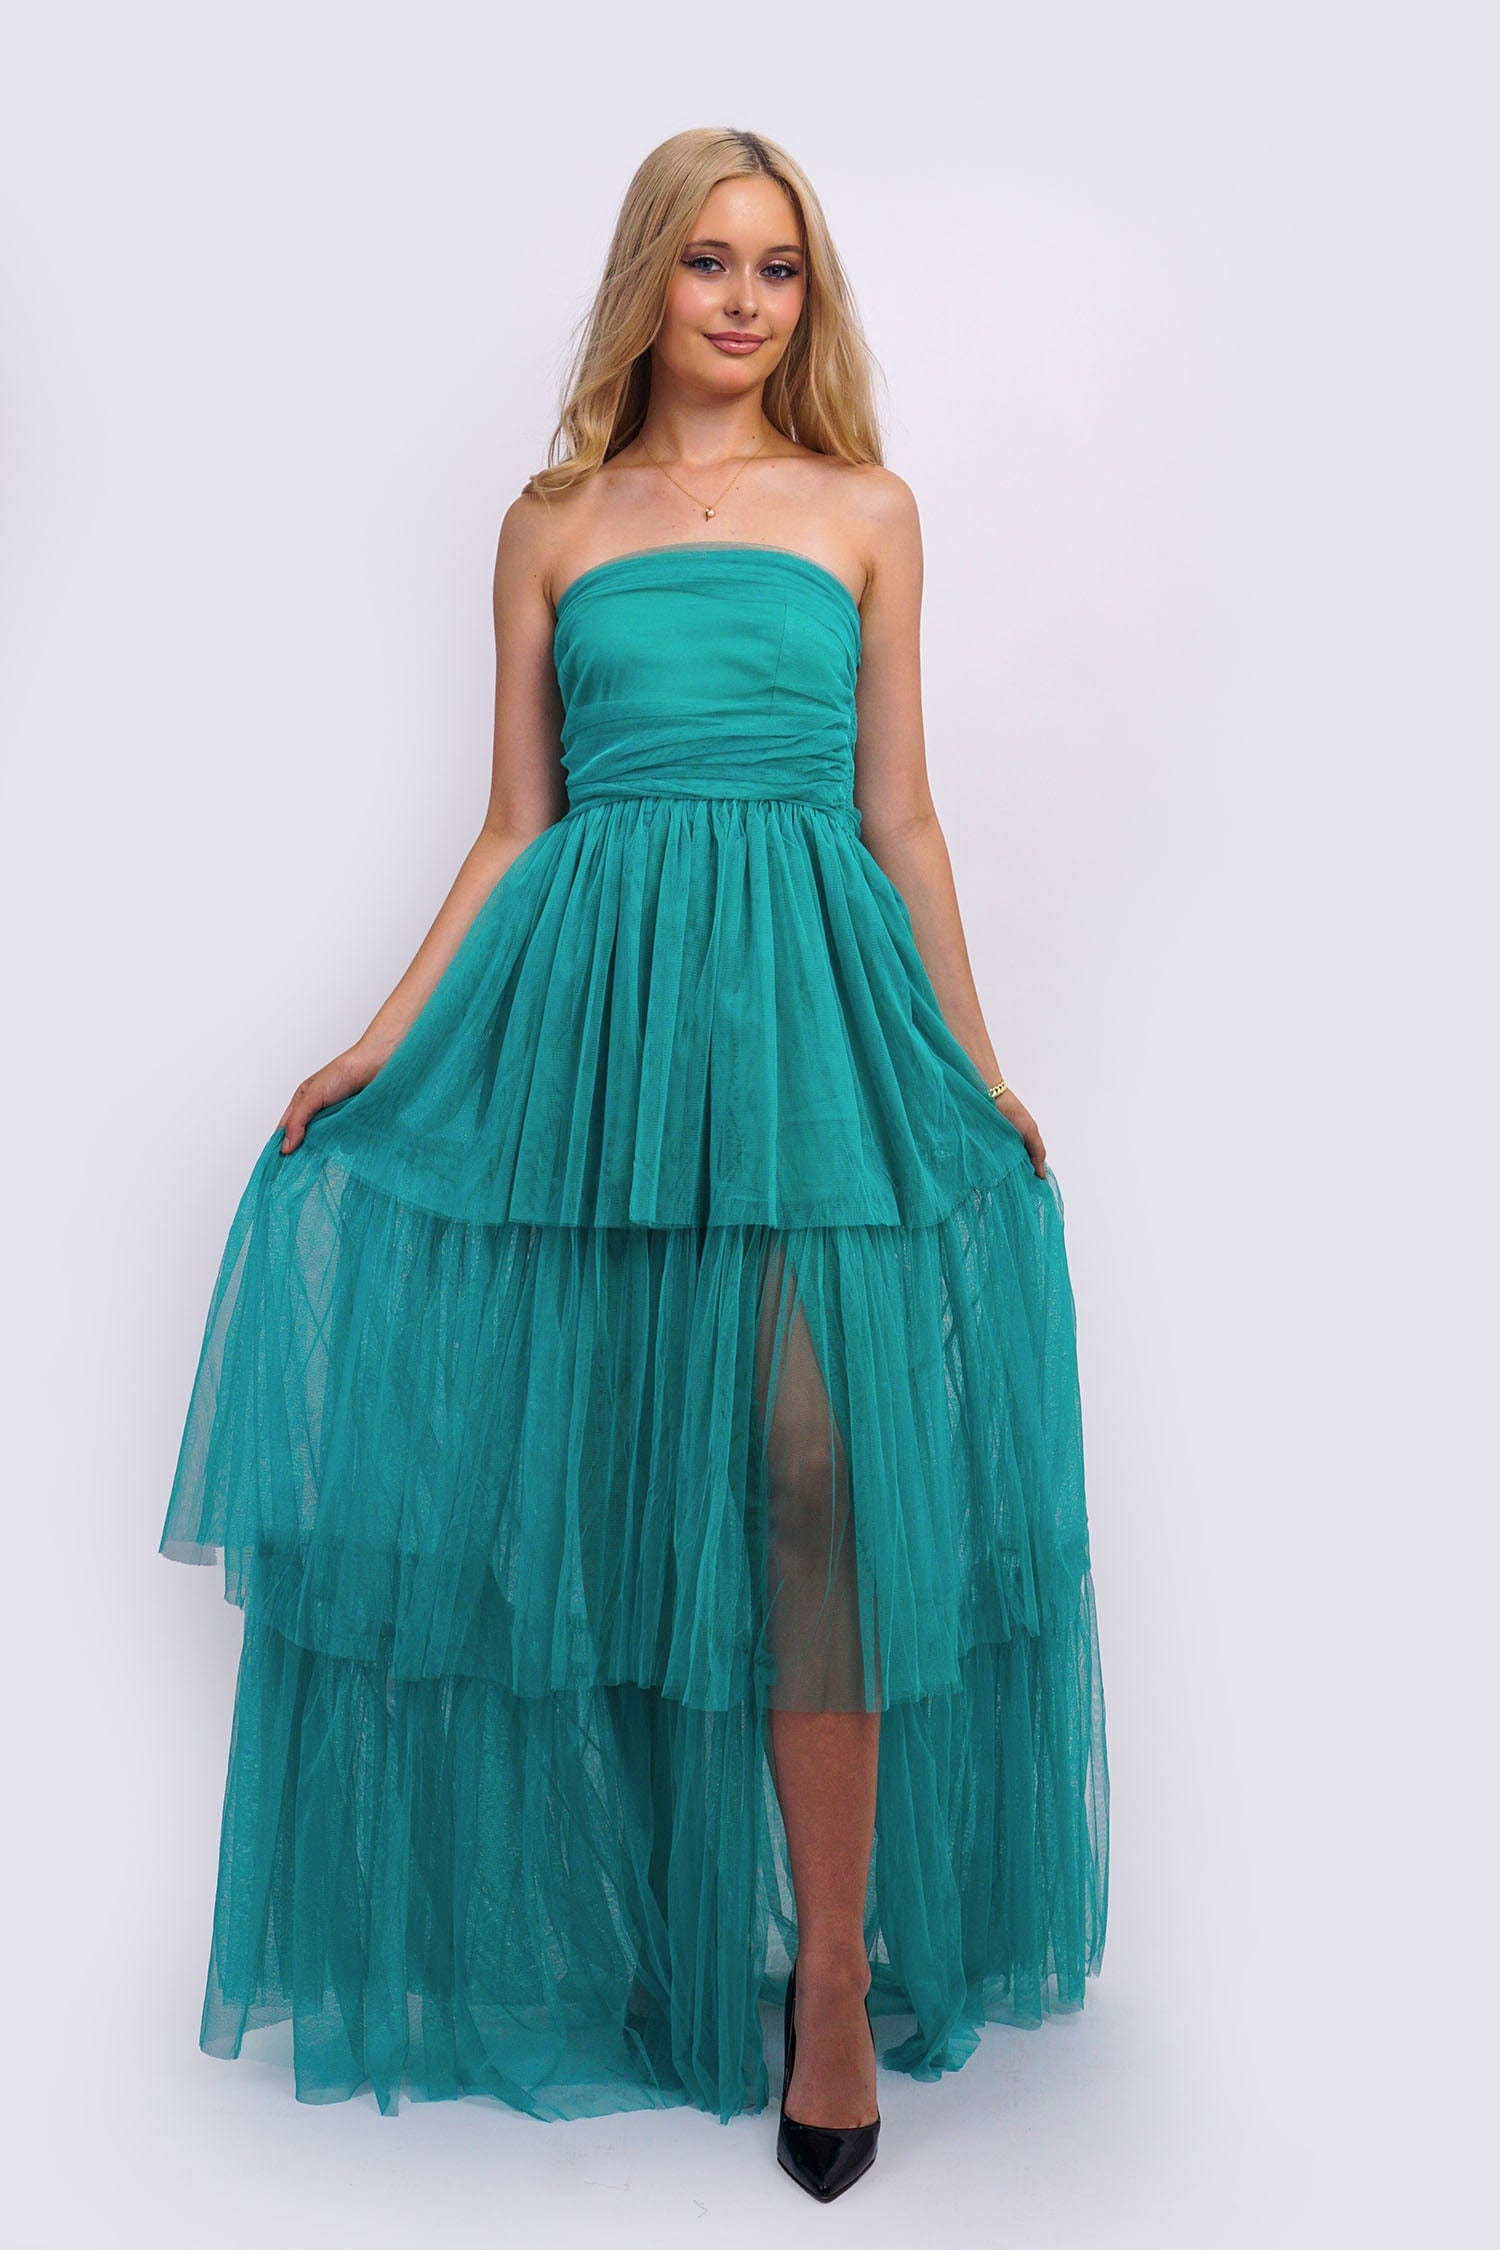 DCD GOWNS Aqua Strapless Tulle Tiers Gown